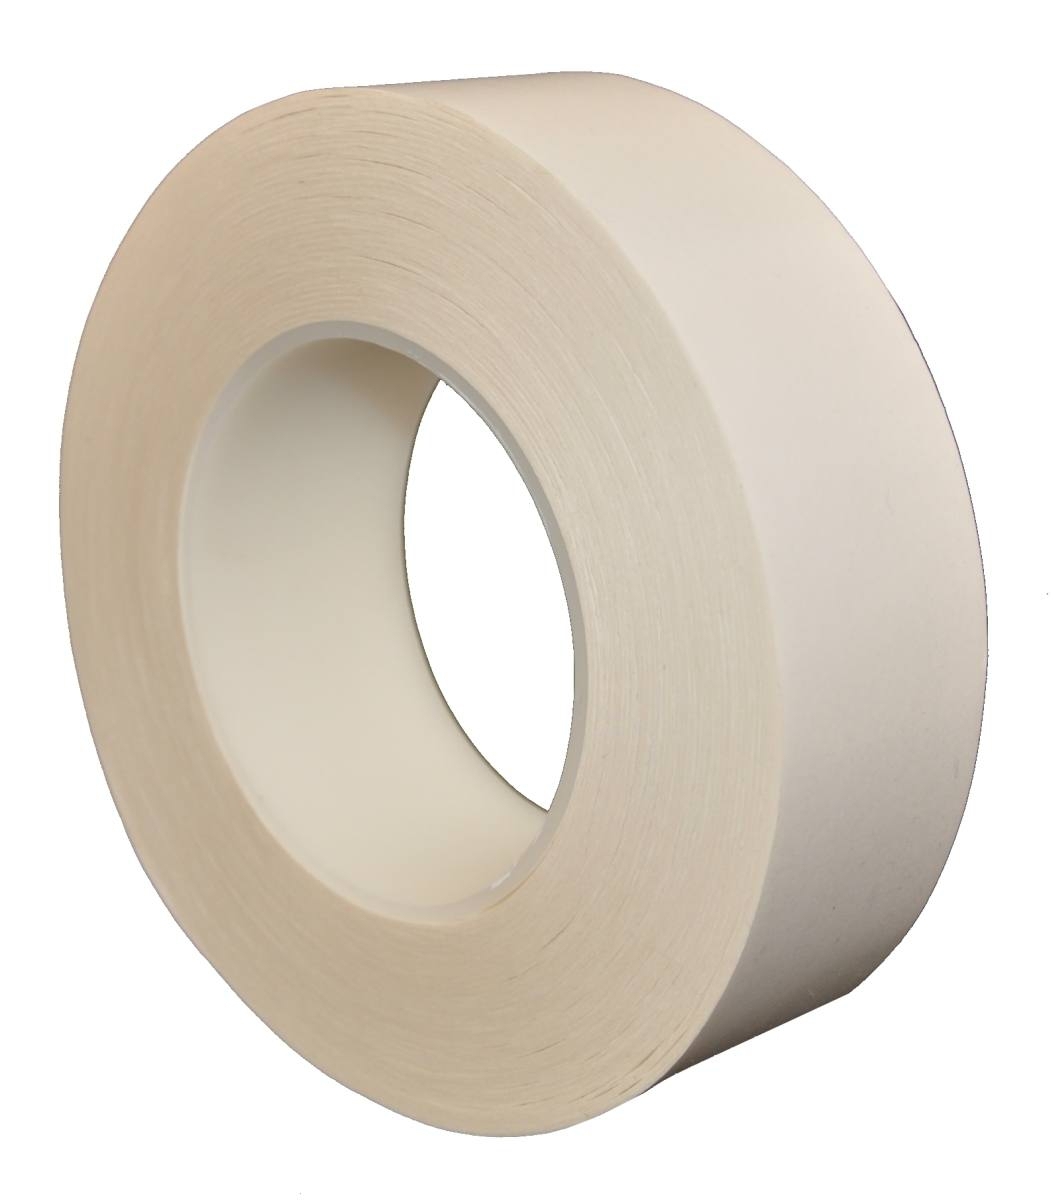 SKS silicone paper release liner, 450mmx150m, coated on both sides with glassine, white